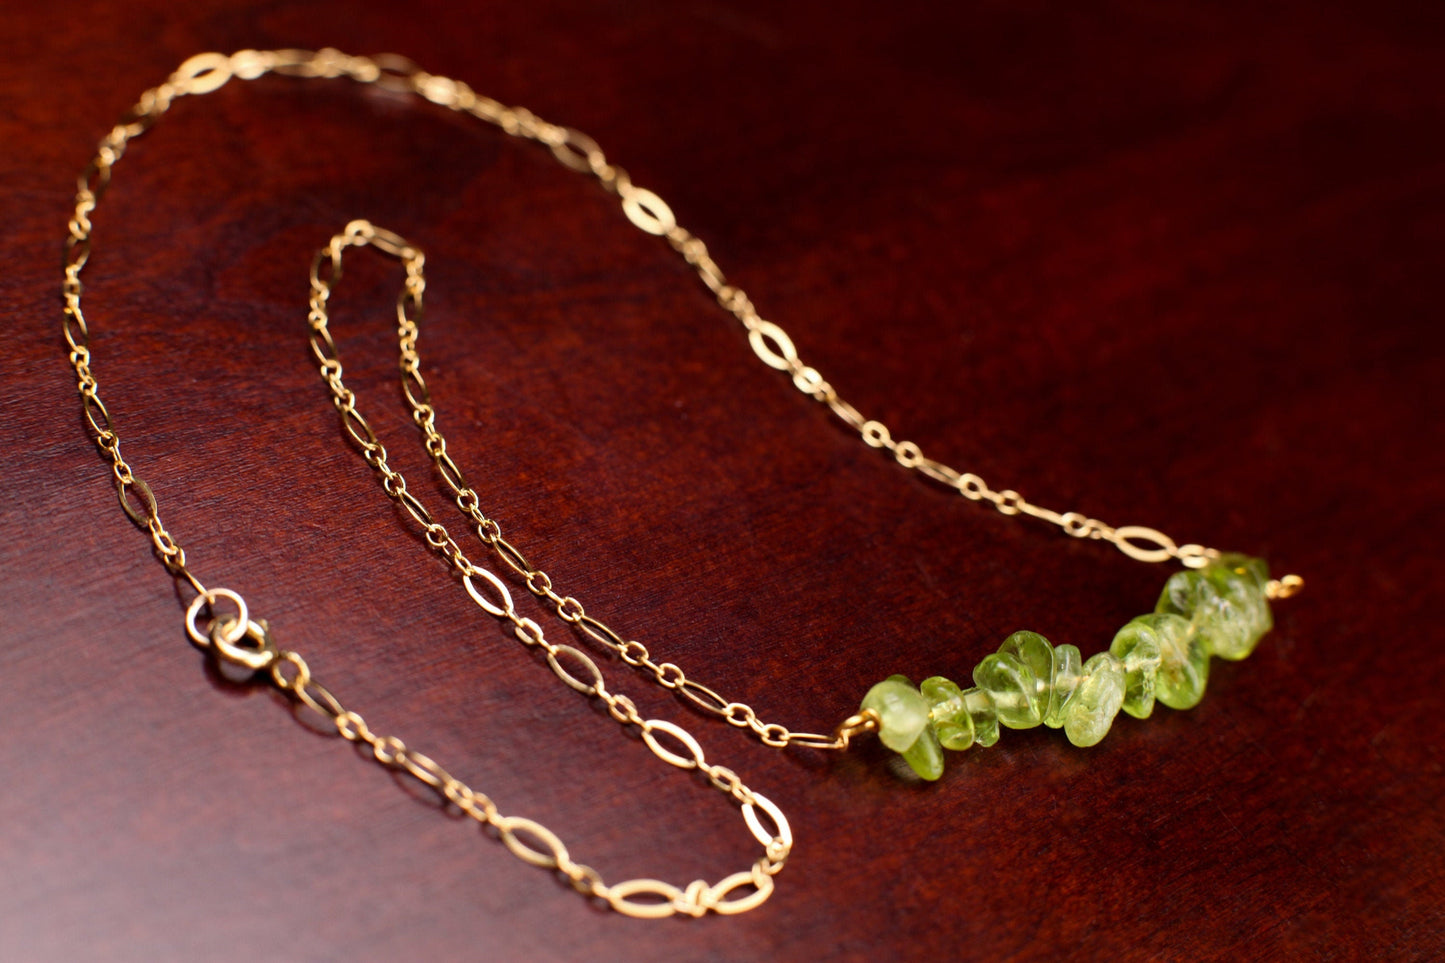 Natural Peridot 5-9mm Freeform Nugget, 14K Gold Filled, 925 Sterling Silver Bar Necklace, Healing Crystal, Chakra, August Birthstone